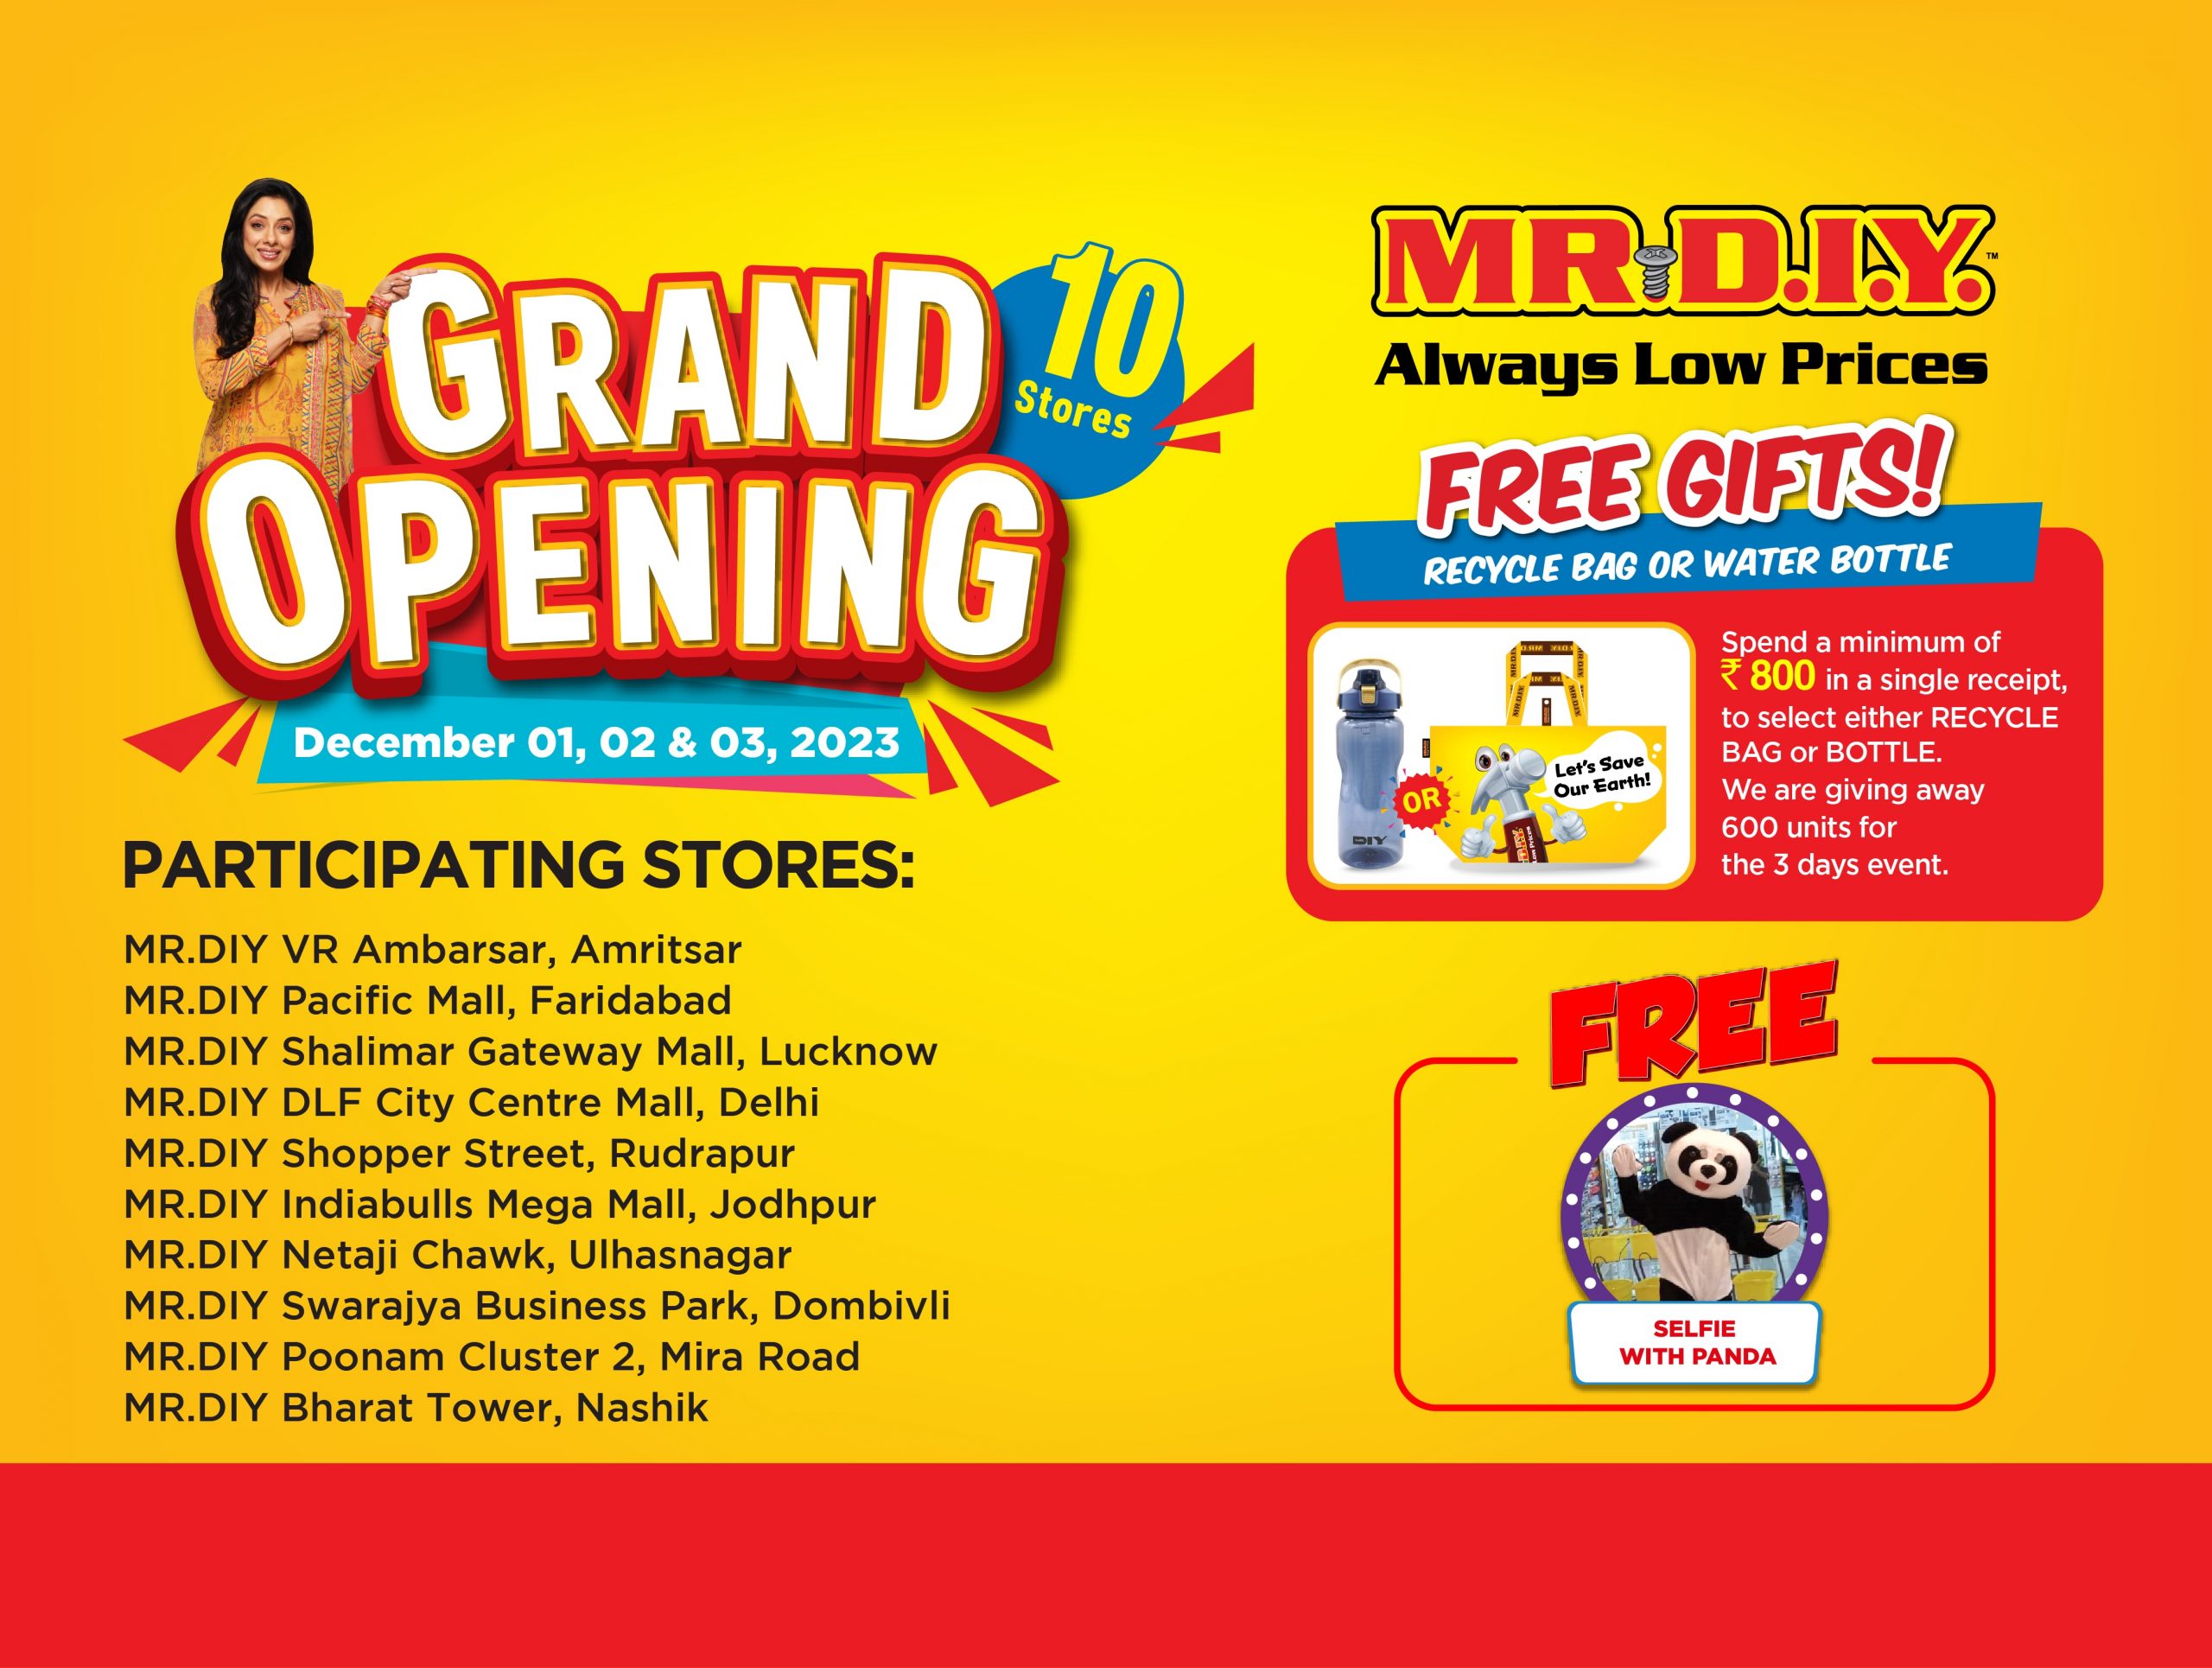 MRDIY Grand Opening Event Gift With Purchase Promotion 2023